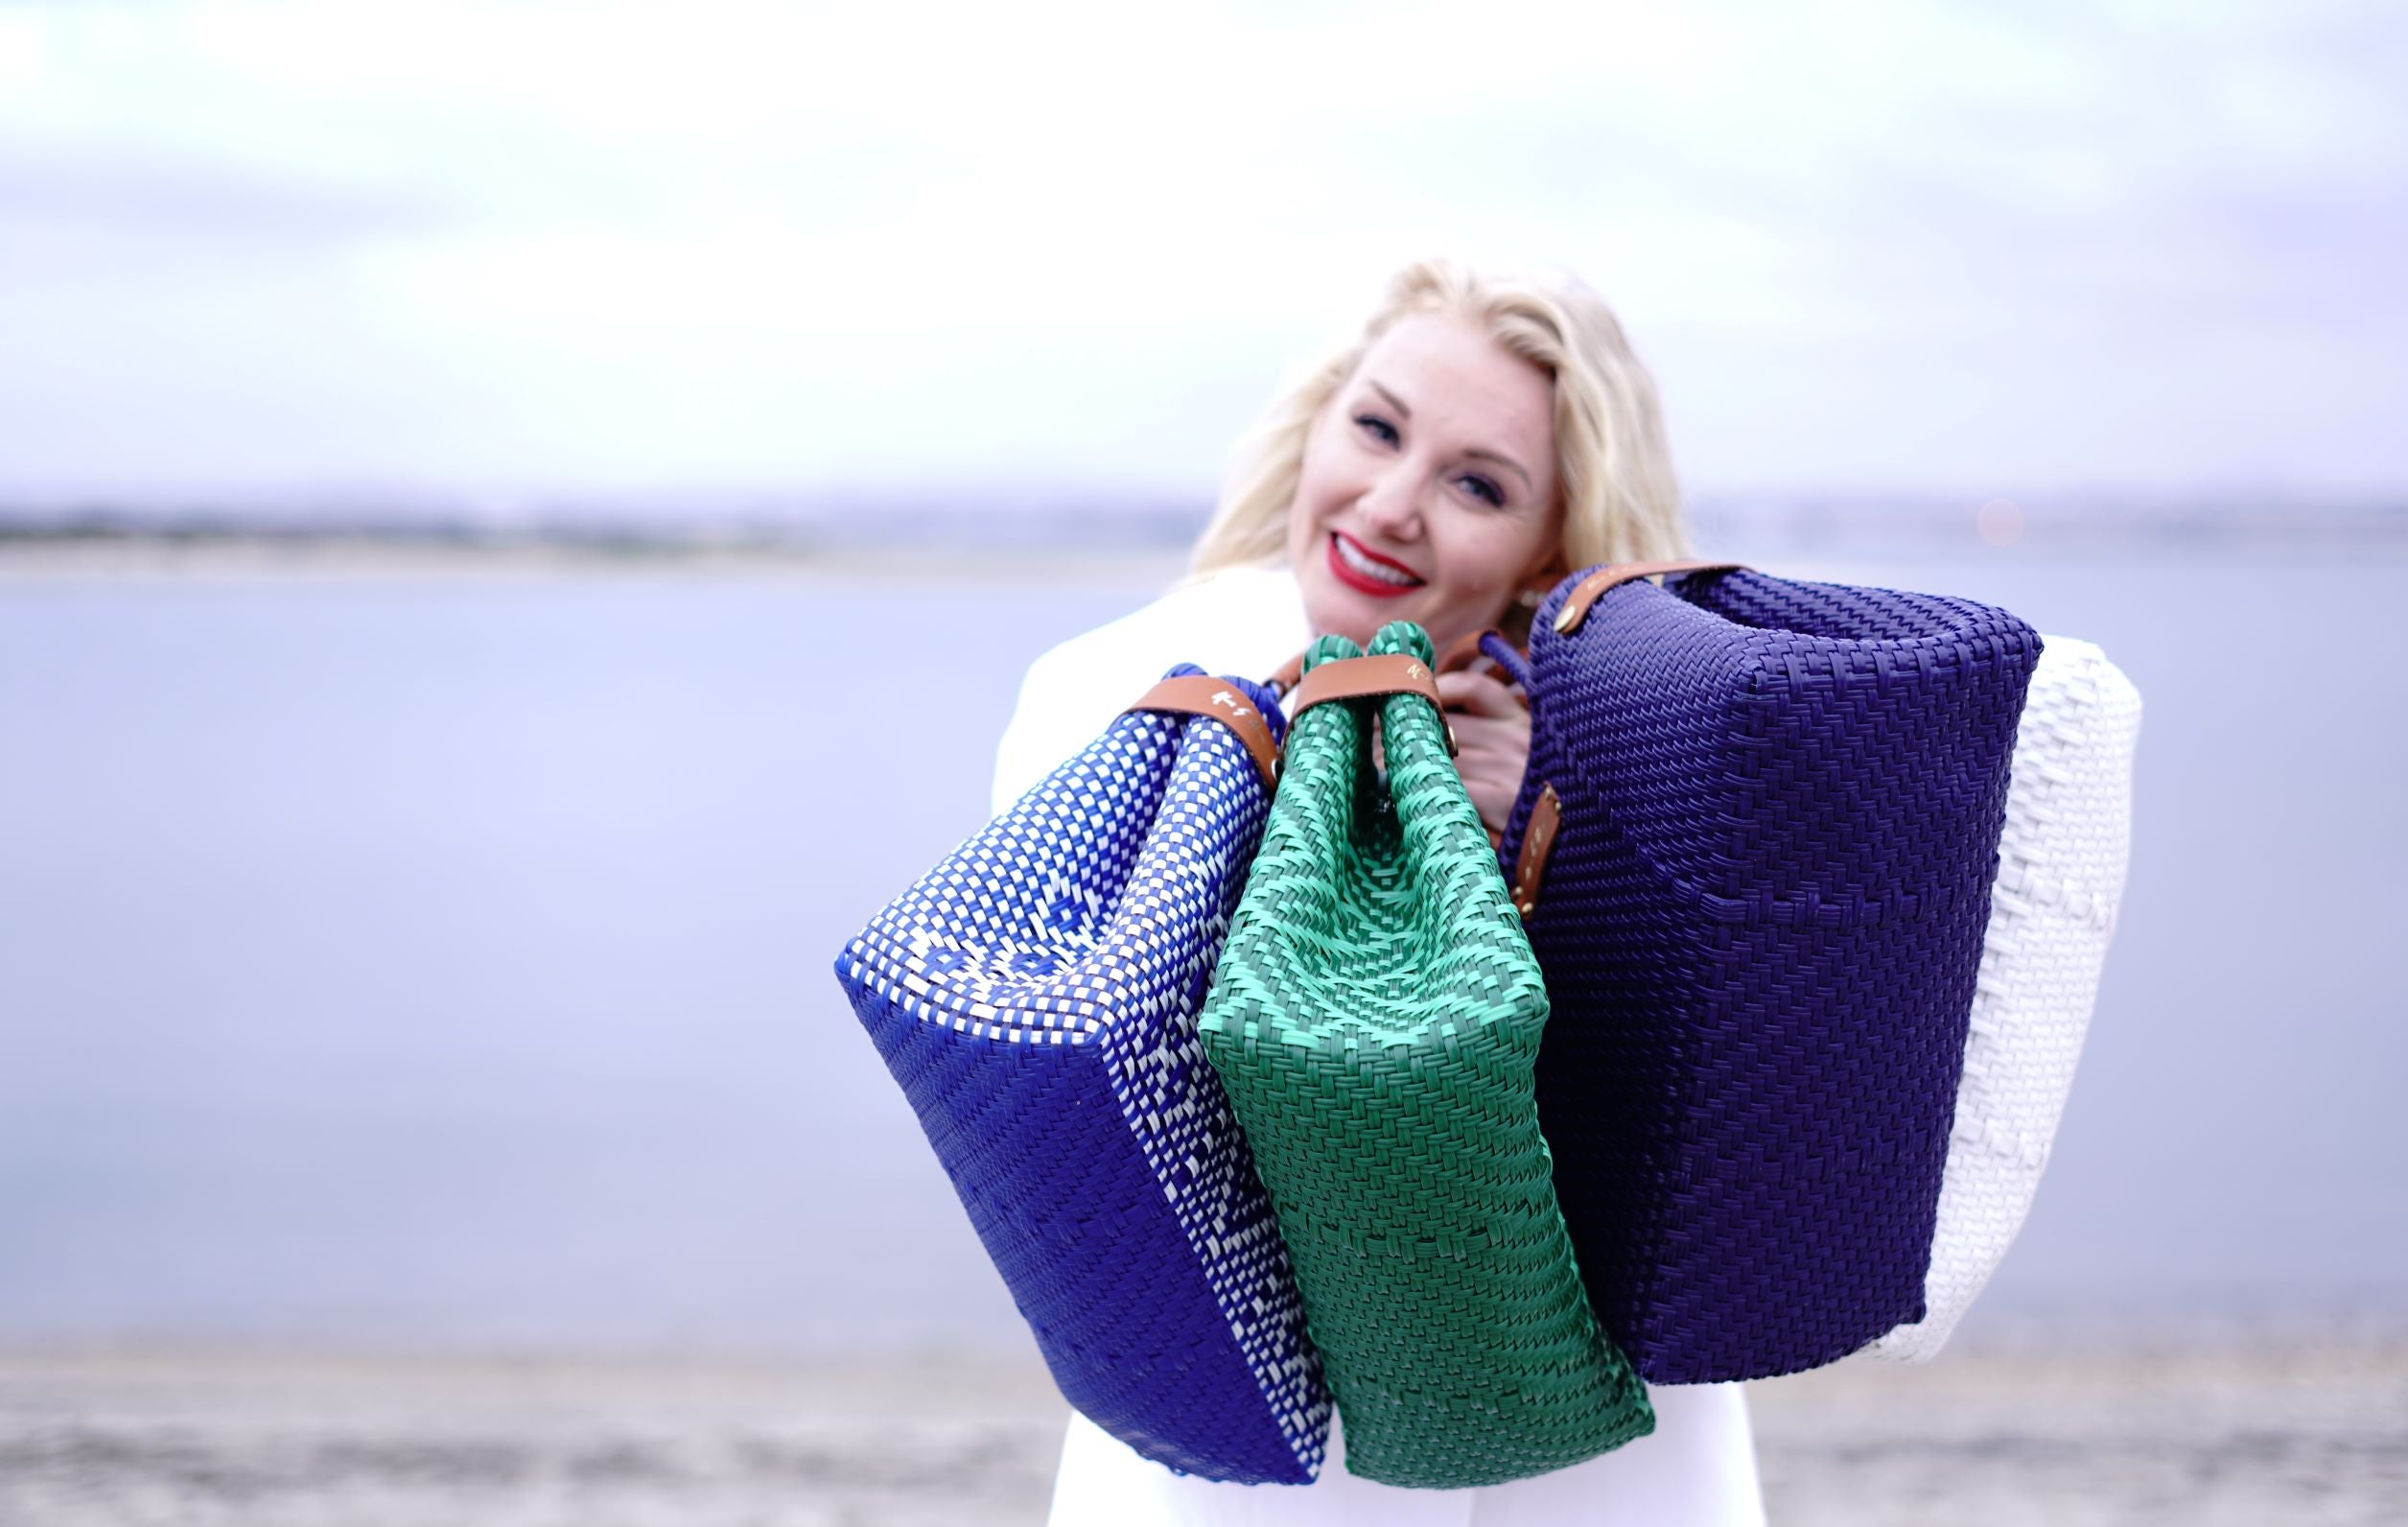 Sustainable luxury handbags. Mavis by Herrera fashion designer. Women owned business minority. Reducing plastic pollution waste. Bags that are good for the planet. 